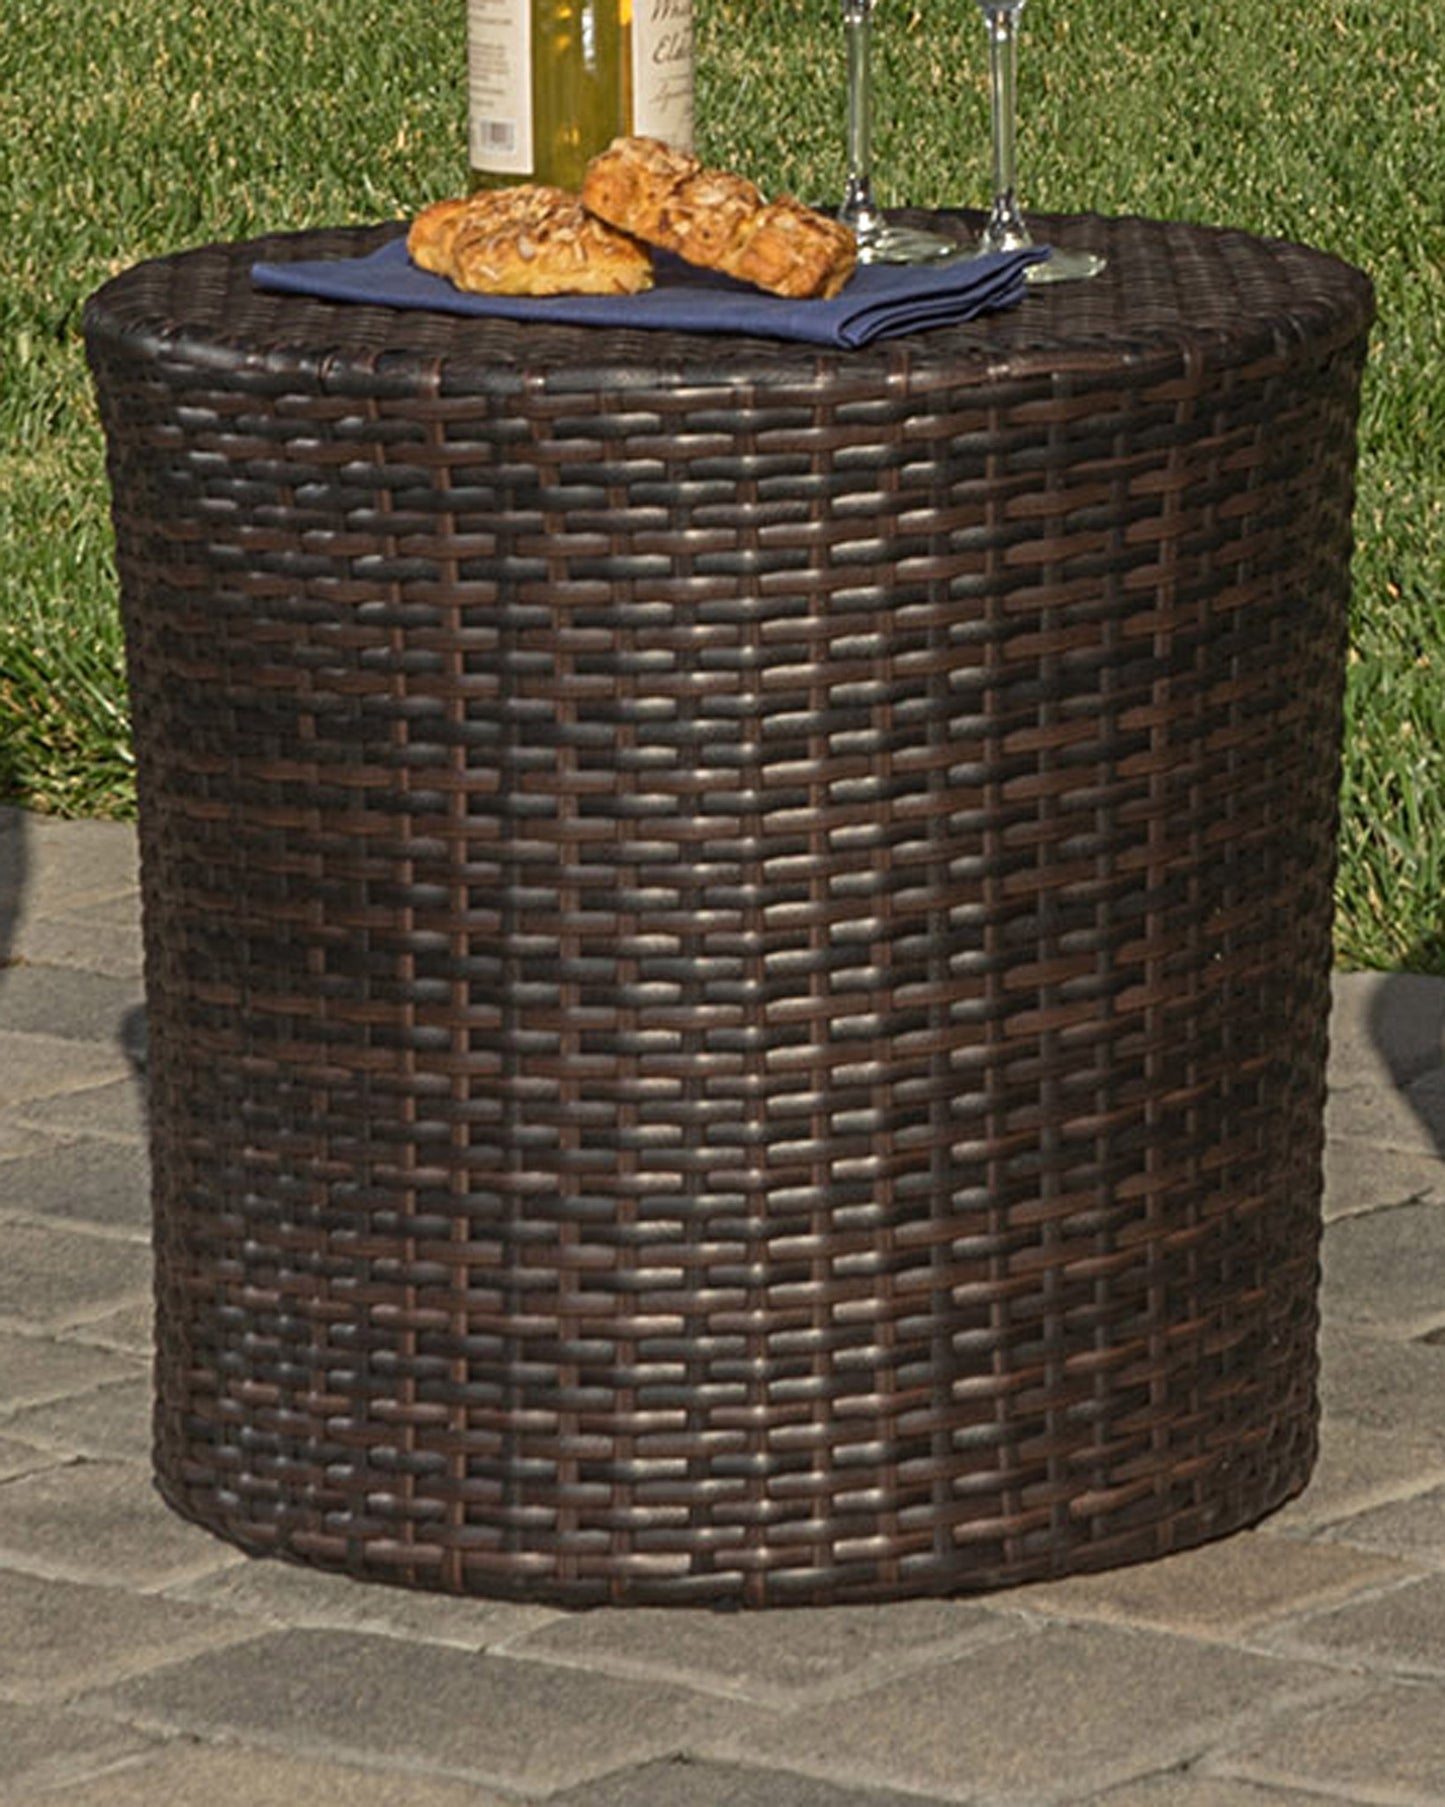 Vestavia Outdoors Brown Wicker 3 Piece Stacking Chair Chat Set